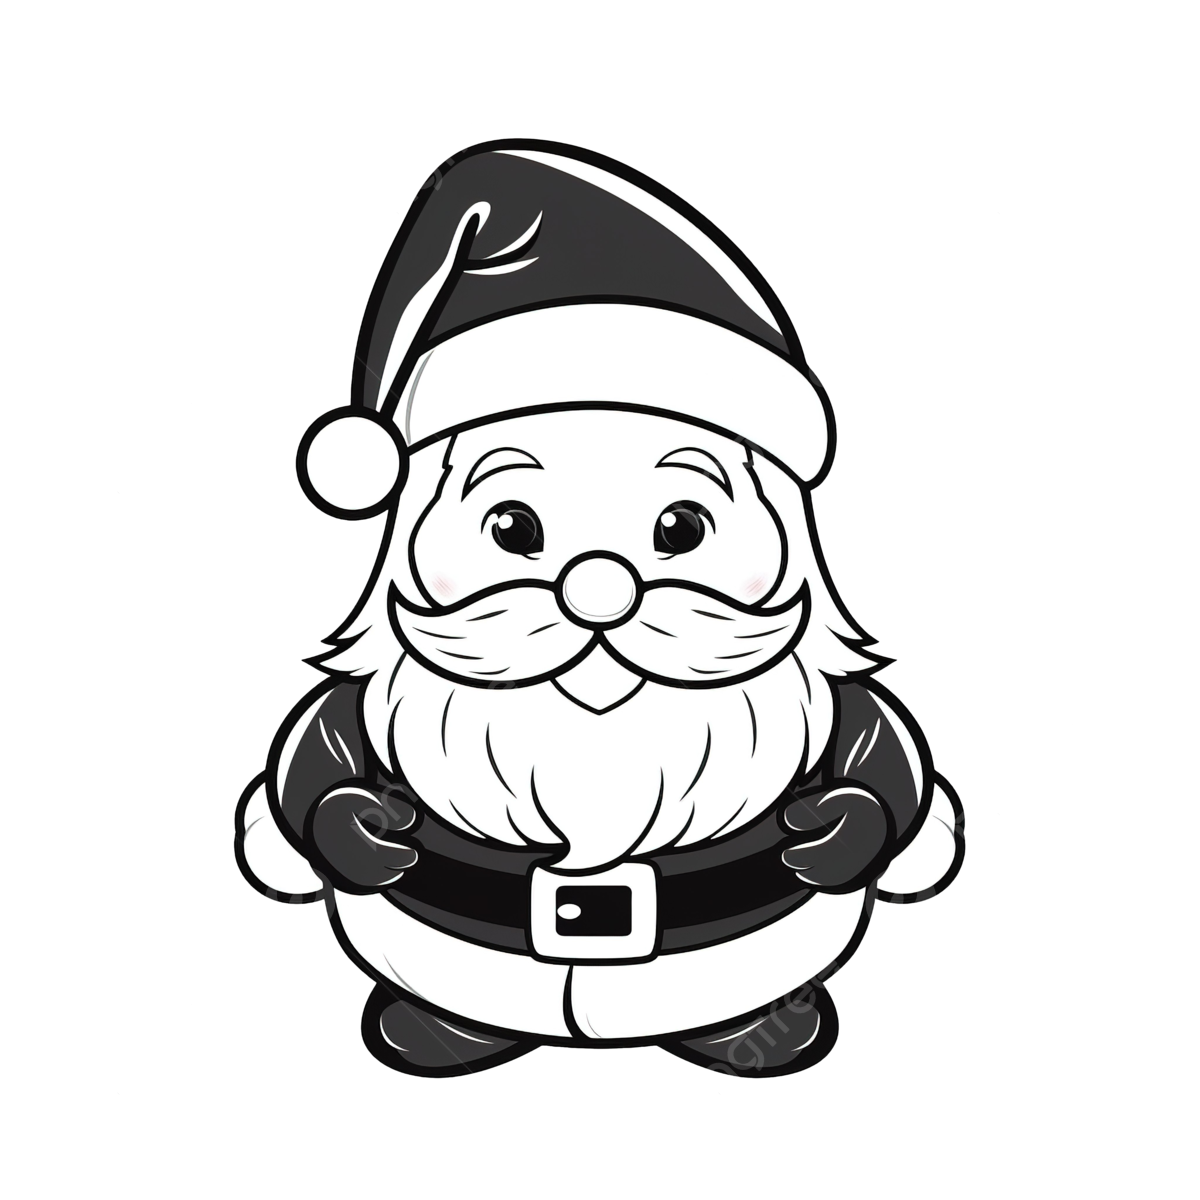 Christmas coloring book or page for kids santa claus black and white vector illustration christmas coloring colouring book png transparent image and clipart for free download